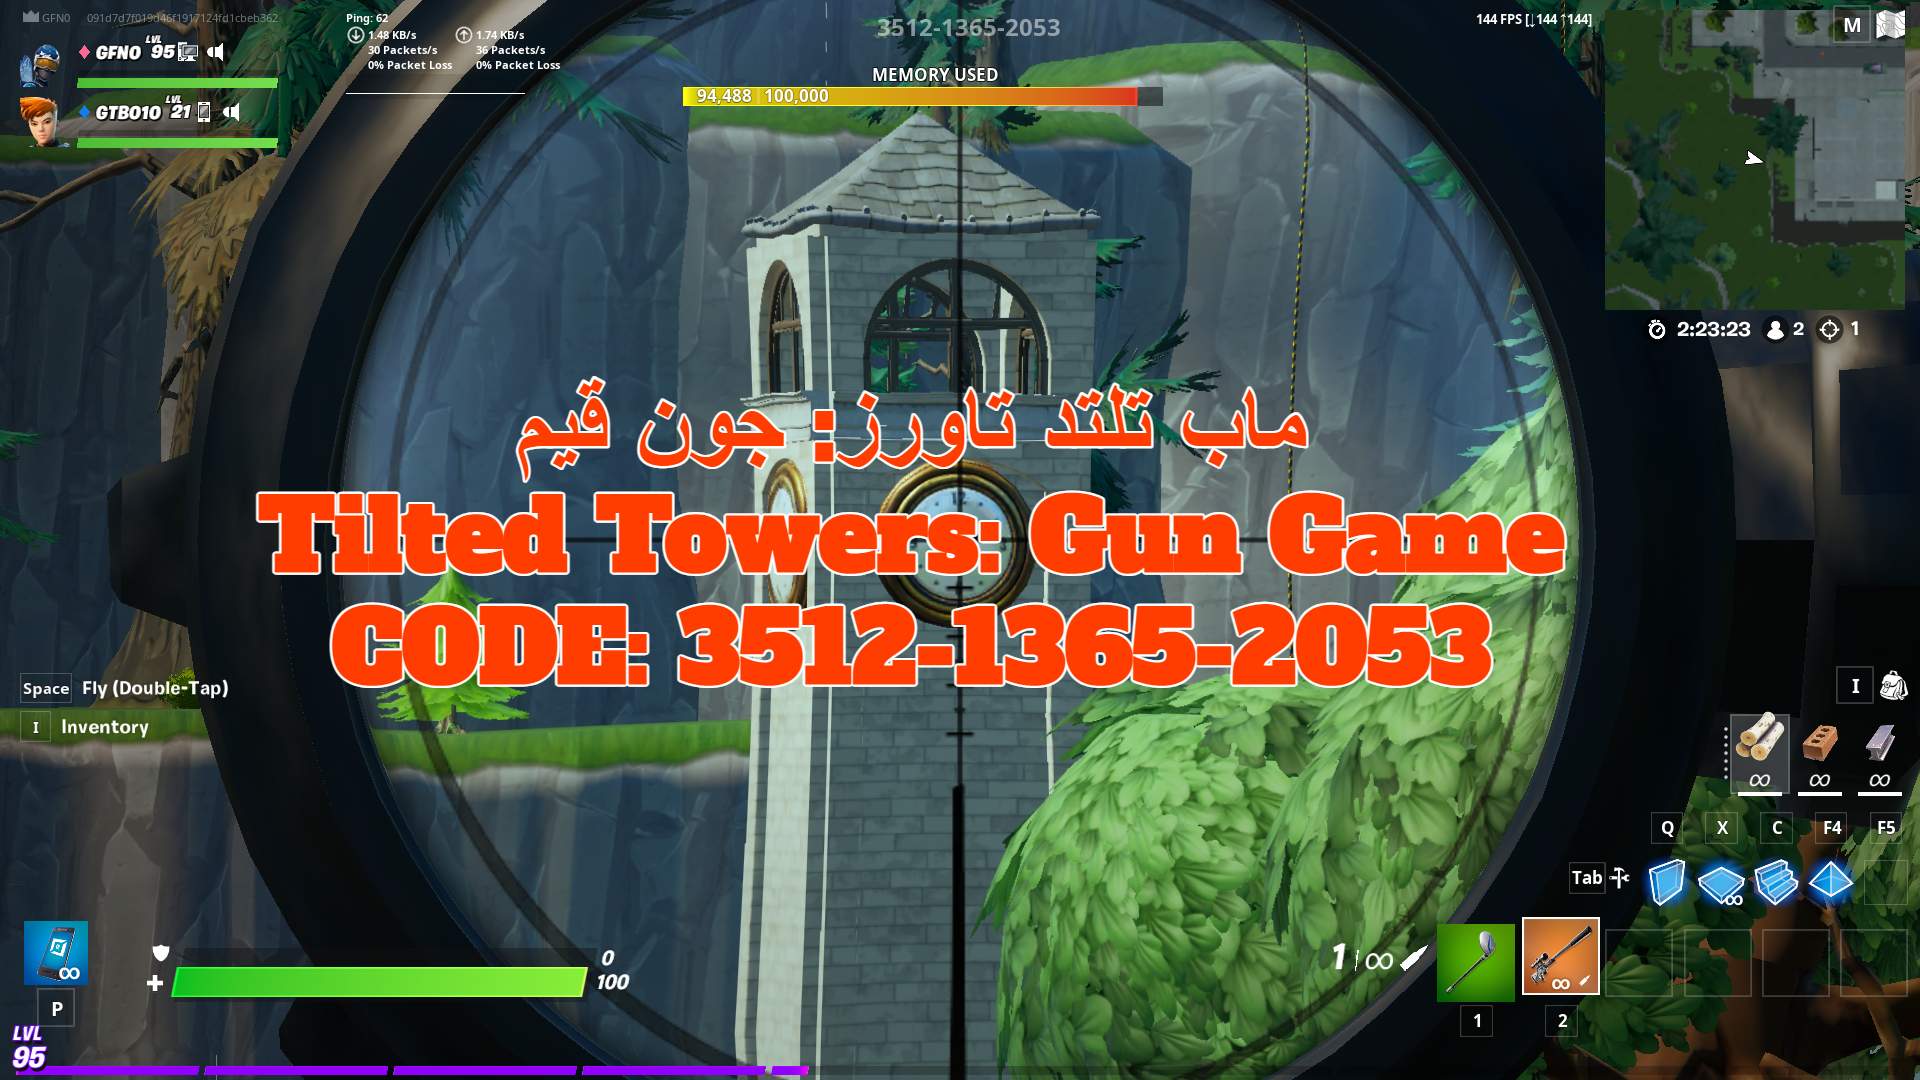 TILTED TOWERS GUN GAME جون قيم